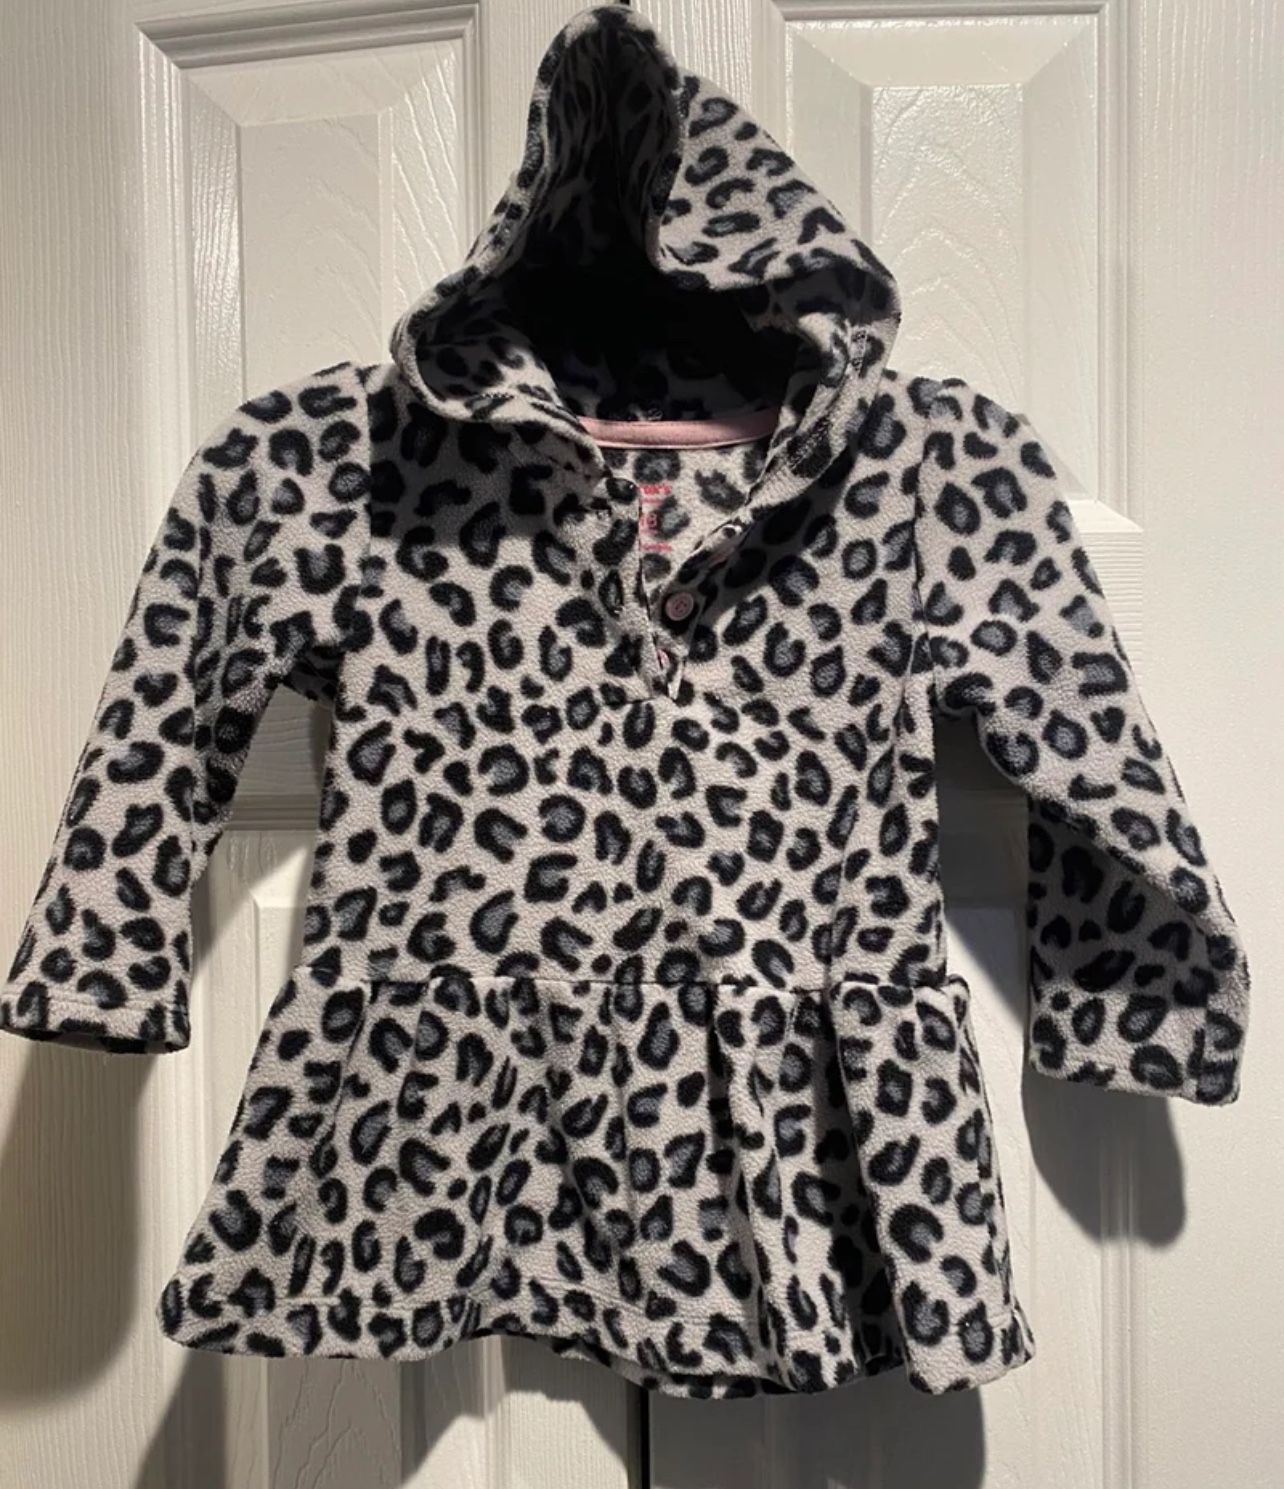 18m Black and white leopard hooded fleece sweatshirt with ruffle bottom 3 buttons at neckline